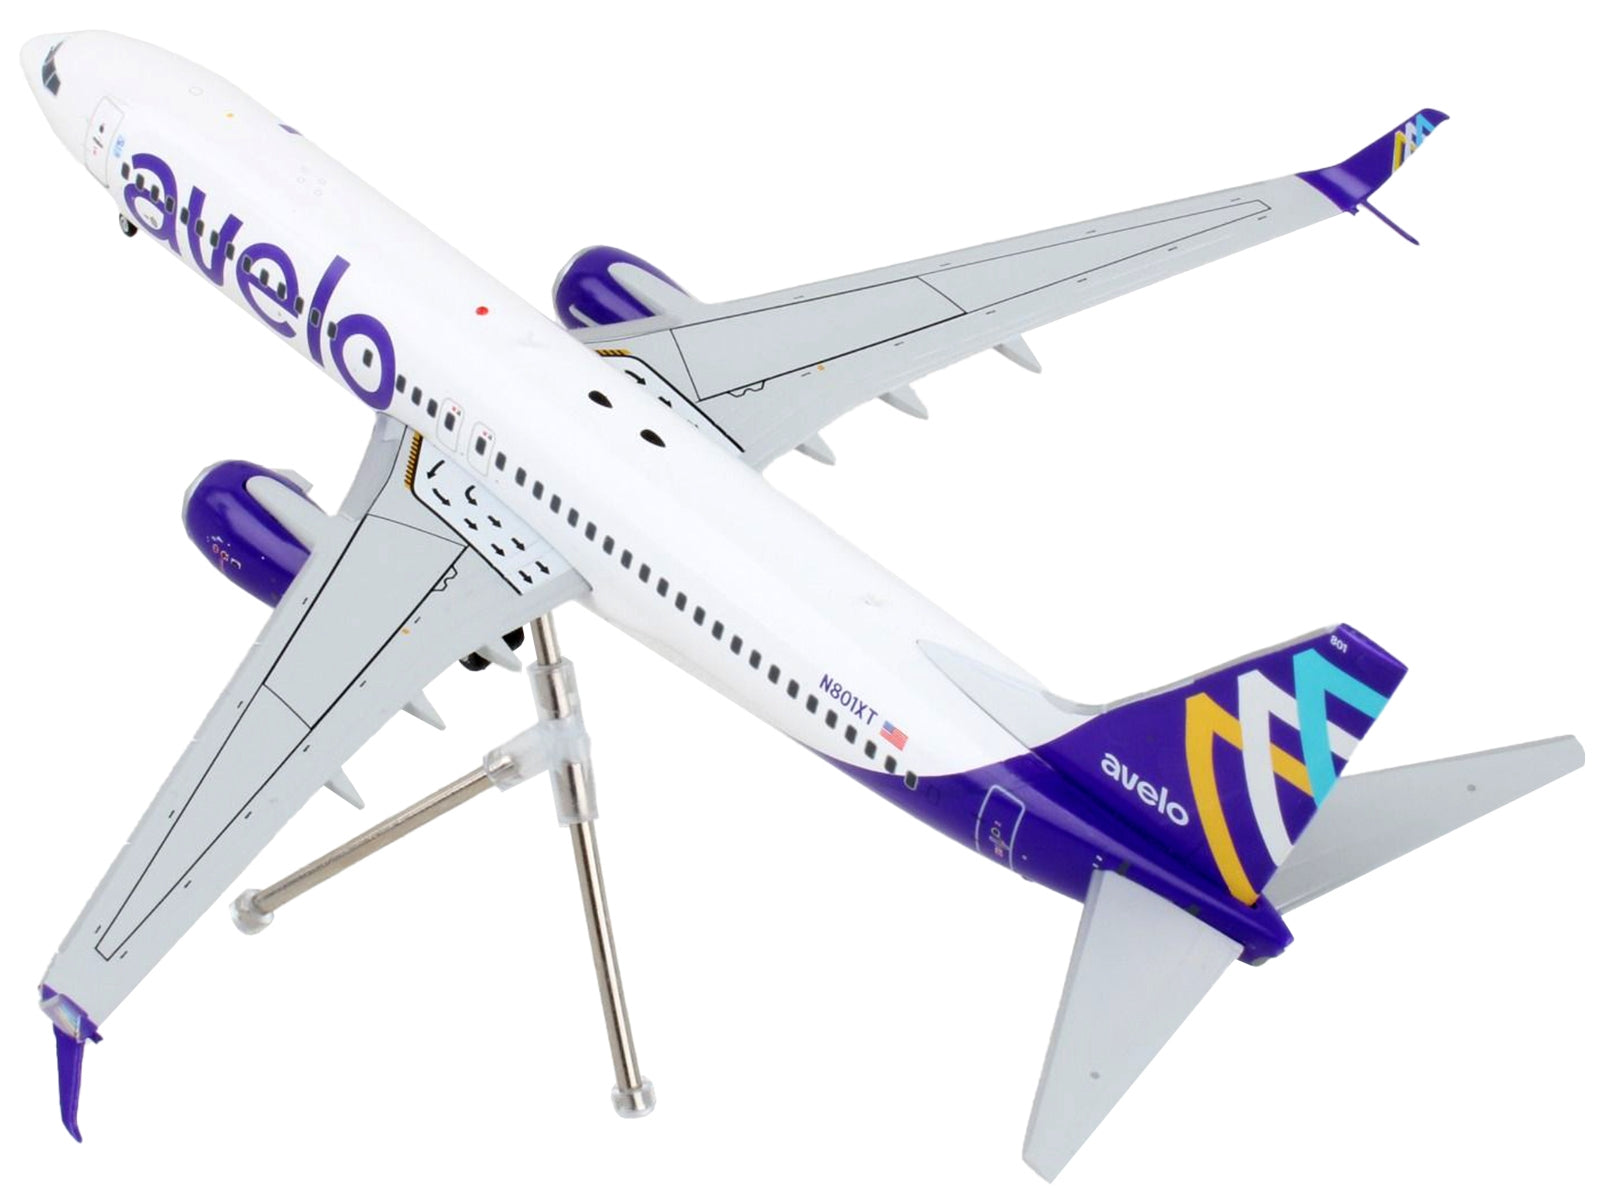 Boeing 737-800 Commercial Aircraft "Avelo Airlines" White with Purple Tail "Gemini 200" Series 1/200 Diecast Model Airplane by GeminiJets